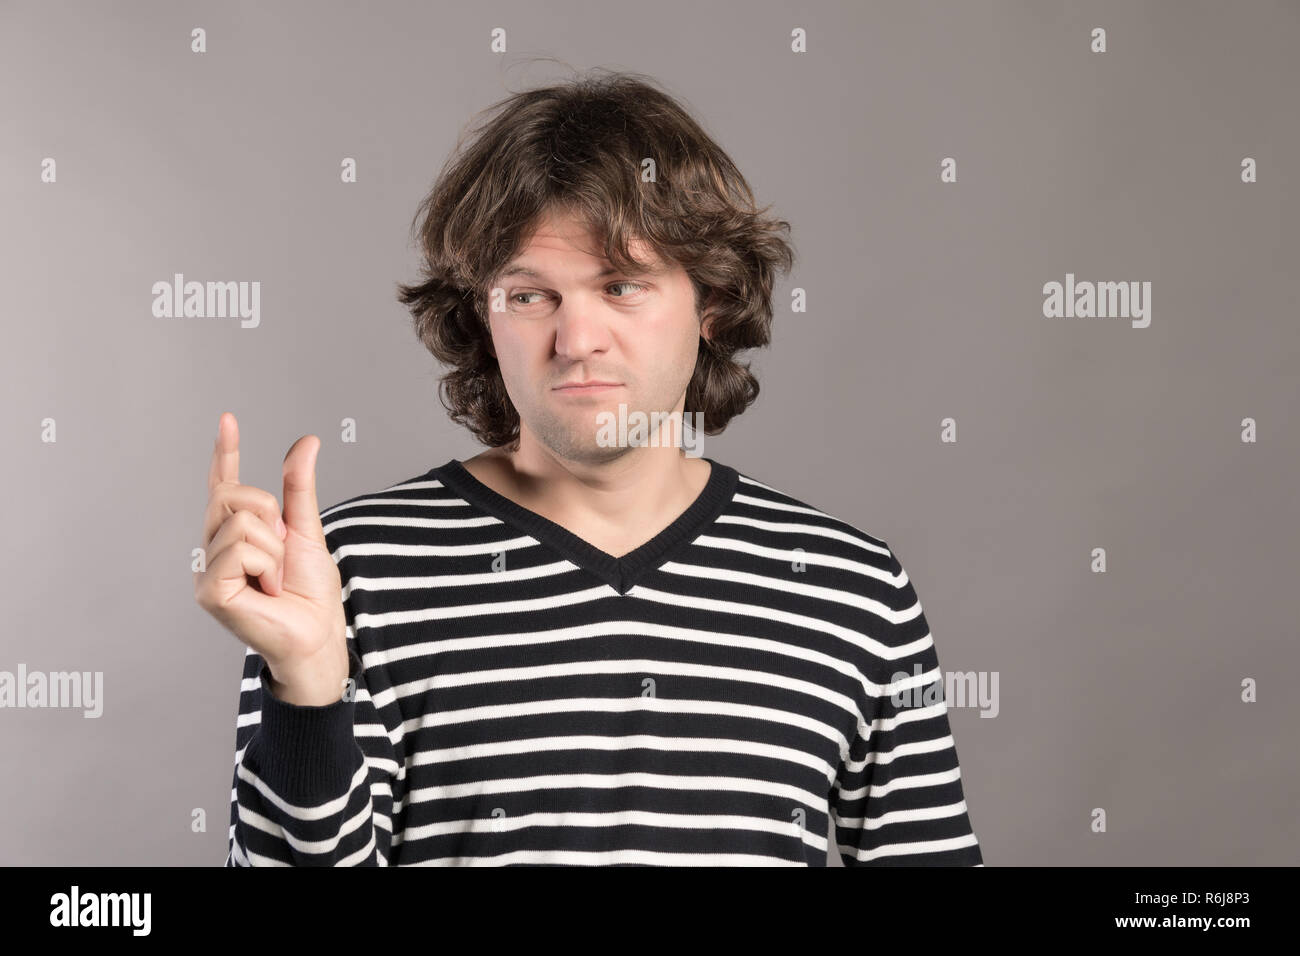 Handsome young man over grey grunge wall smiling and confident gesturing with hand doing size sign with fingers while looking and the camera. Measure concept. Stock Photo